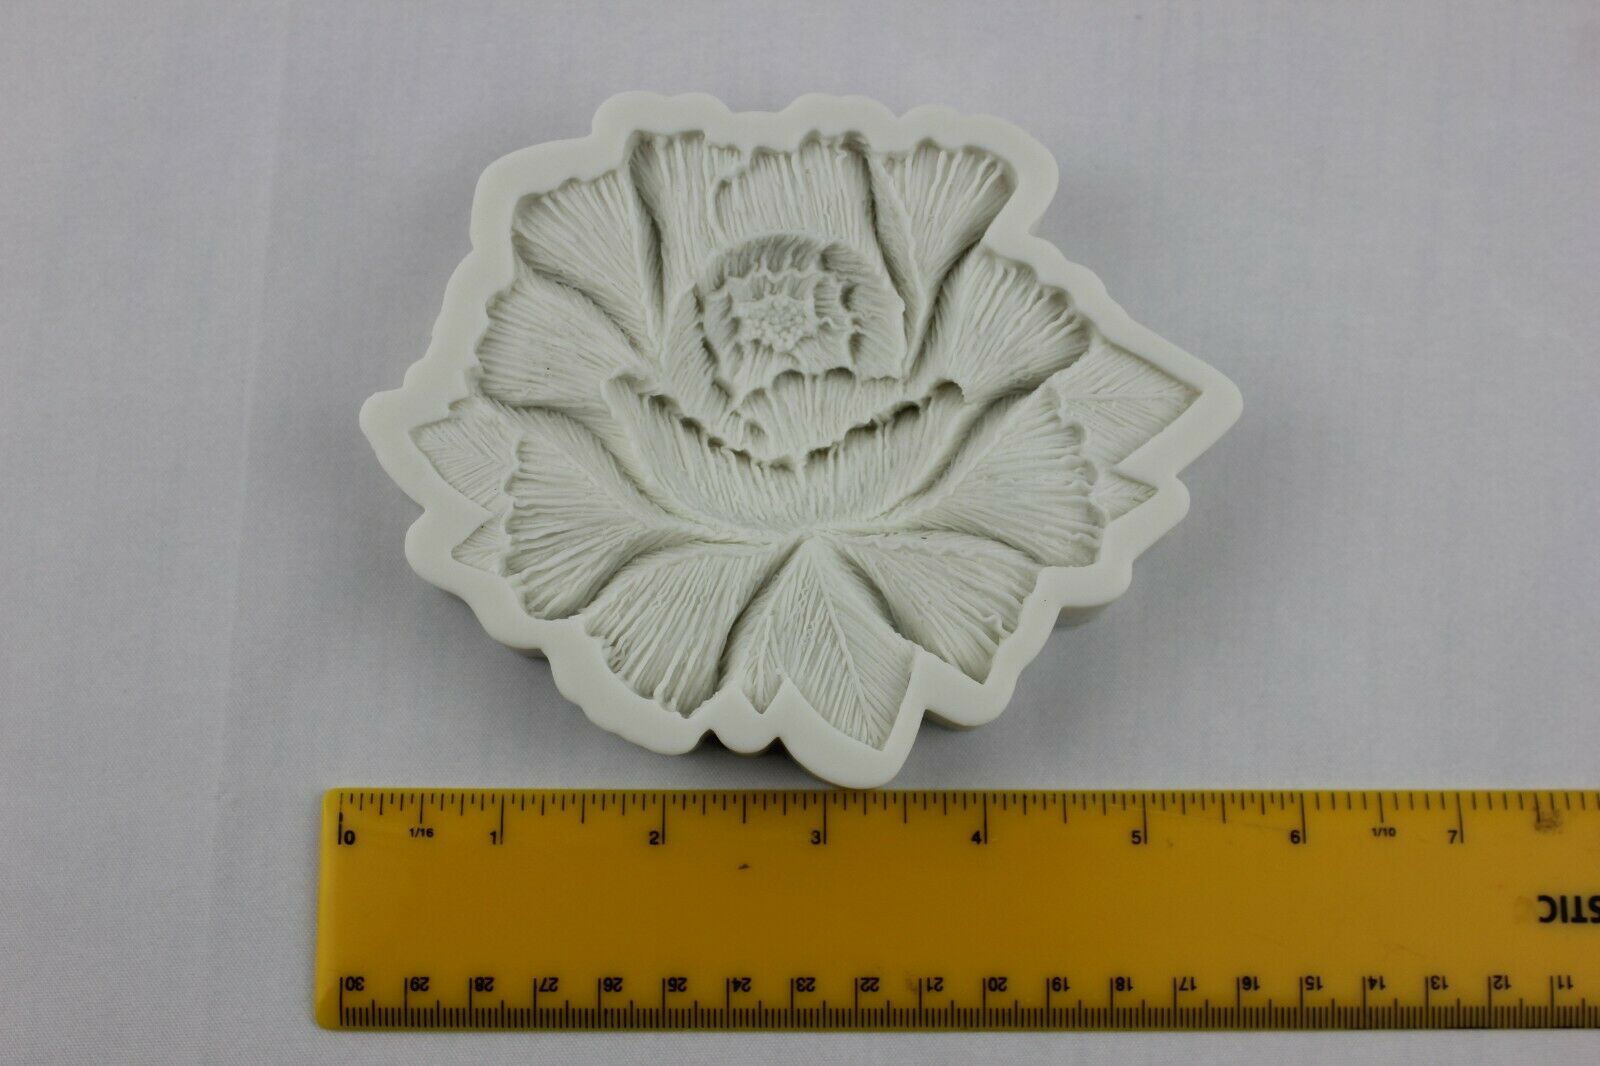 attachment-https://www.cupcakeaddicts.co.uk/wp-content/uploads/imported/2/Large-Flower-silicone-mould-Resin-Icing-Fondant-Ice-Soap-Sugar-Craft-Melt-3-324684382922.jpg